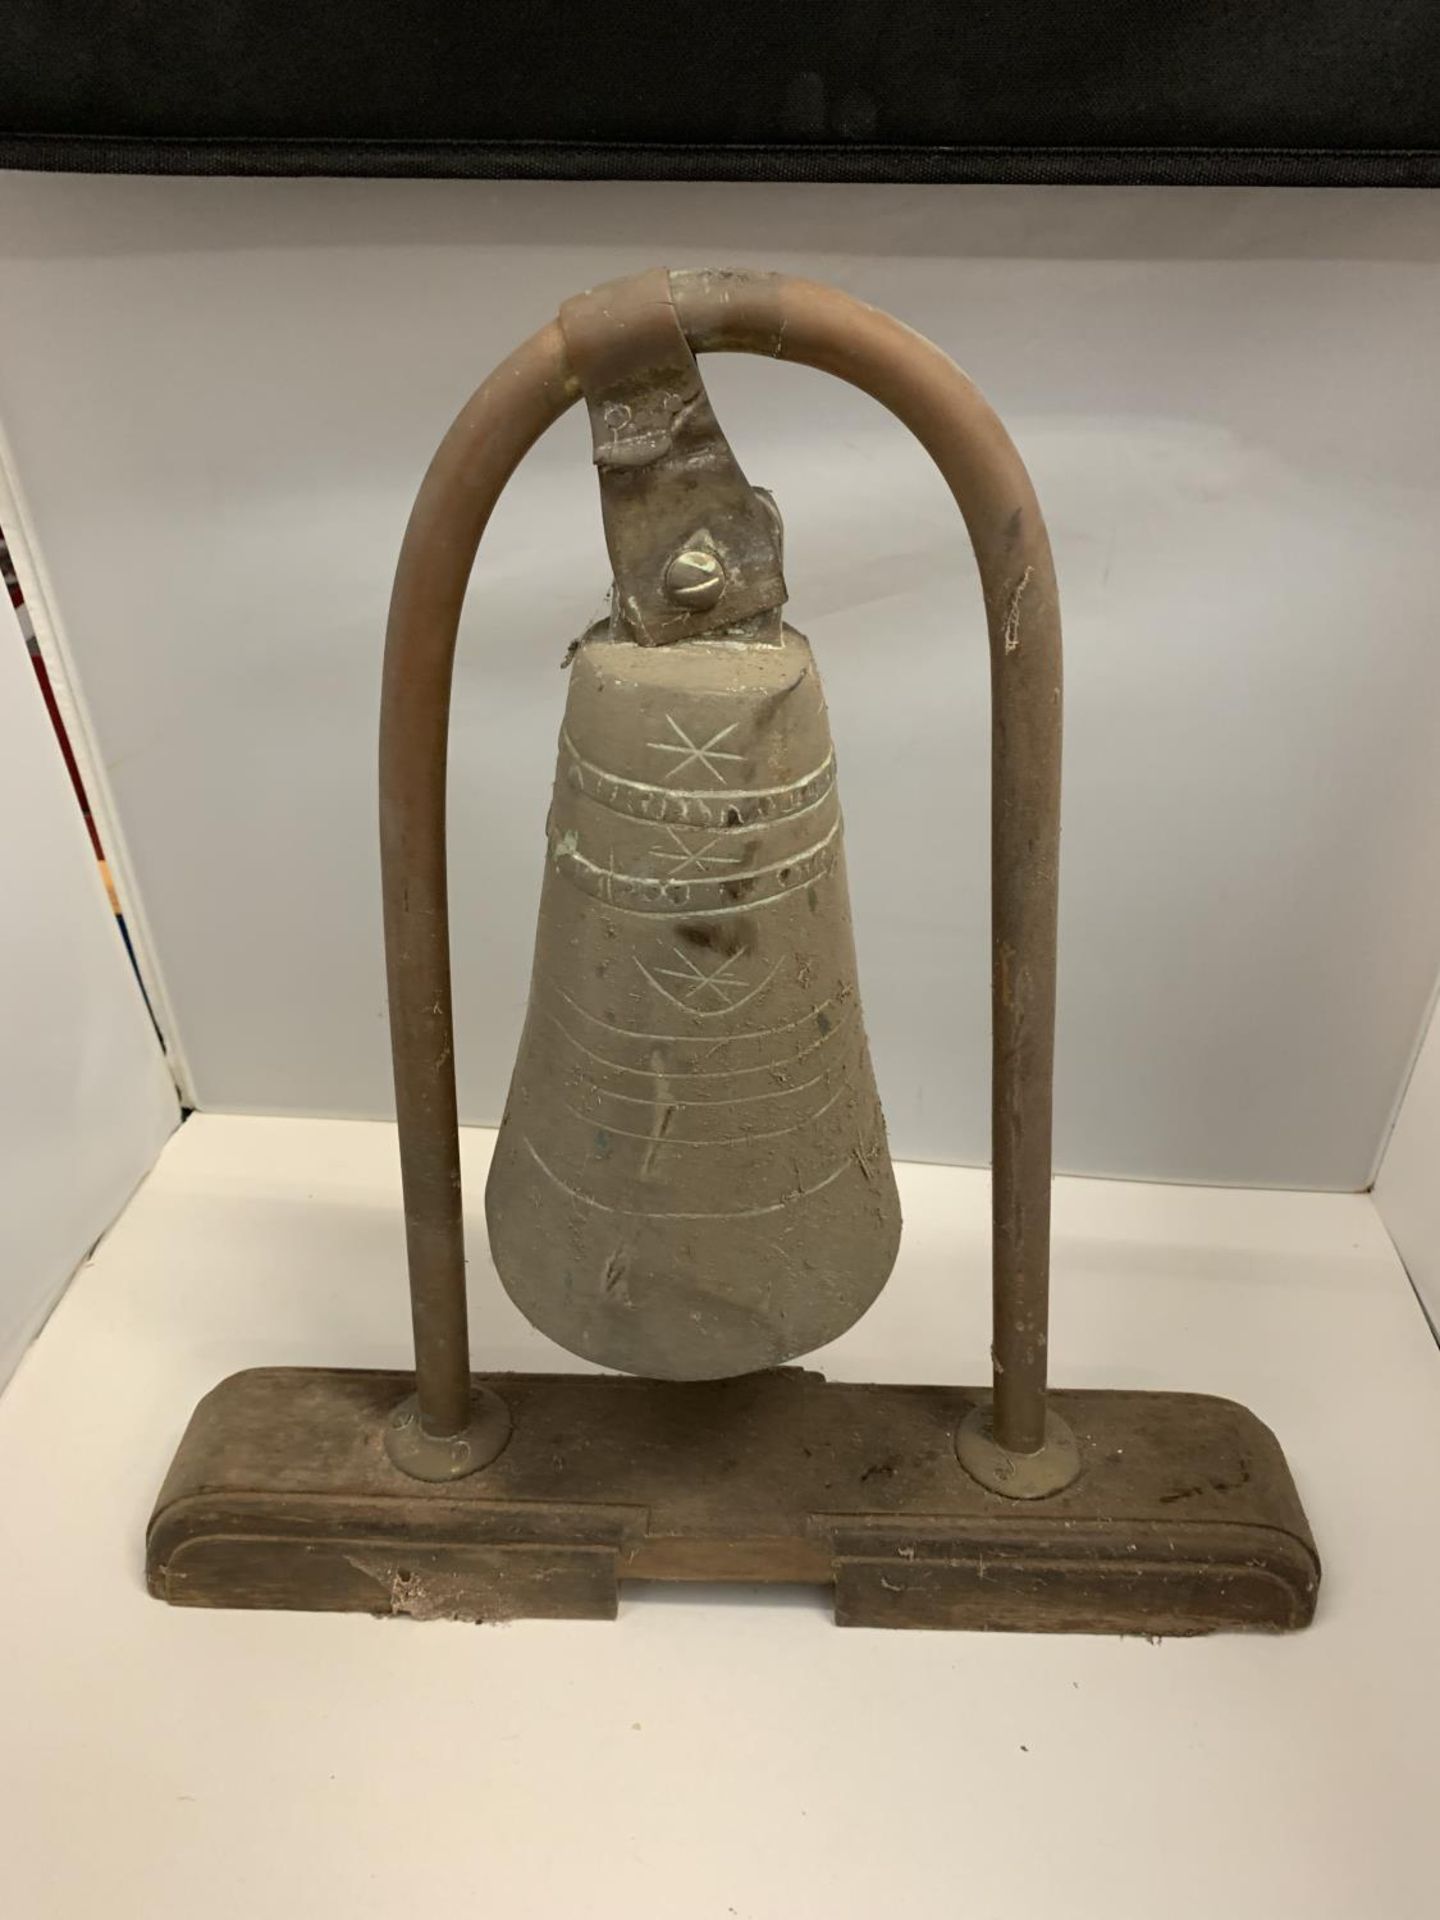 A VINTAGE UNUSUAL BRASS BELL ON A WOODEN PLINTH POSSIBLY FROM A SHIP H:45CM - Image 3 of 3